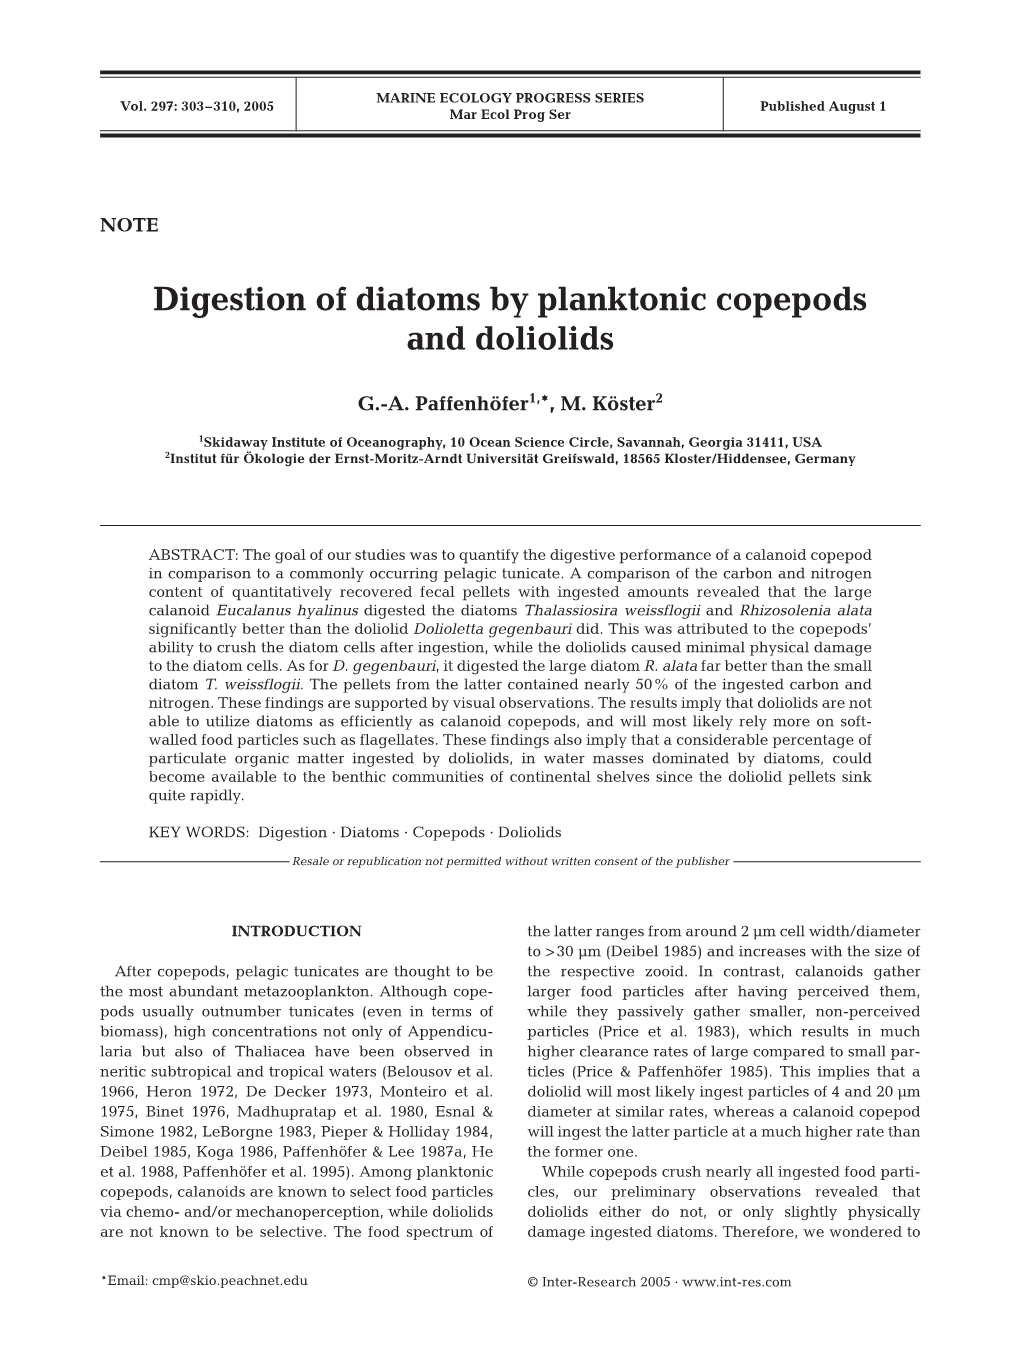 Digestion of Diatoms by Planktonic Copepods and Doliolids